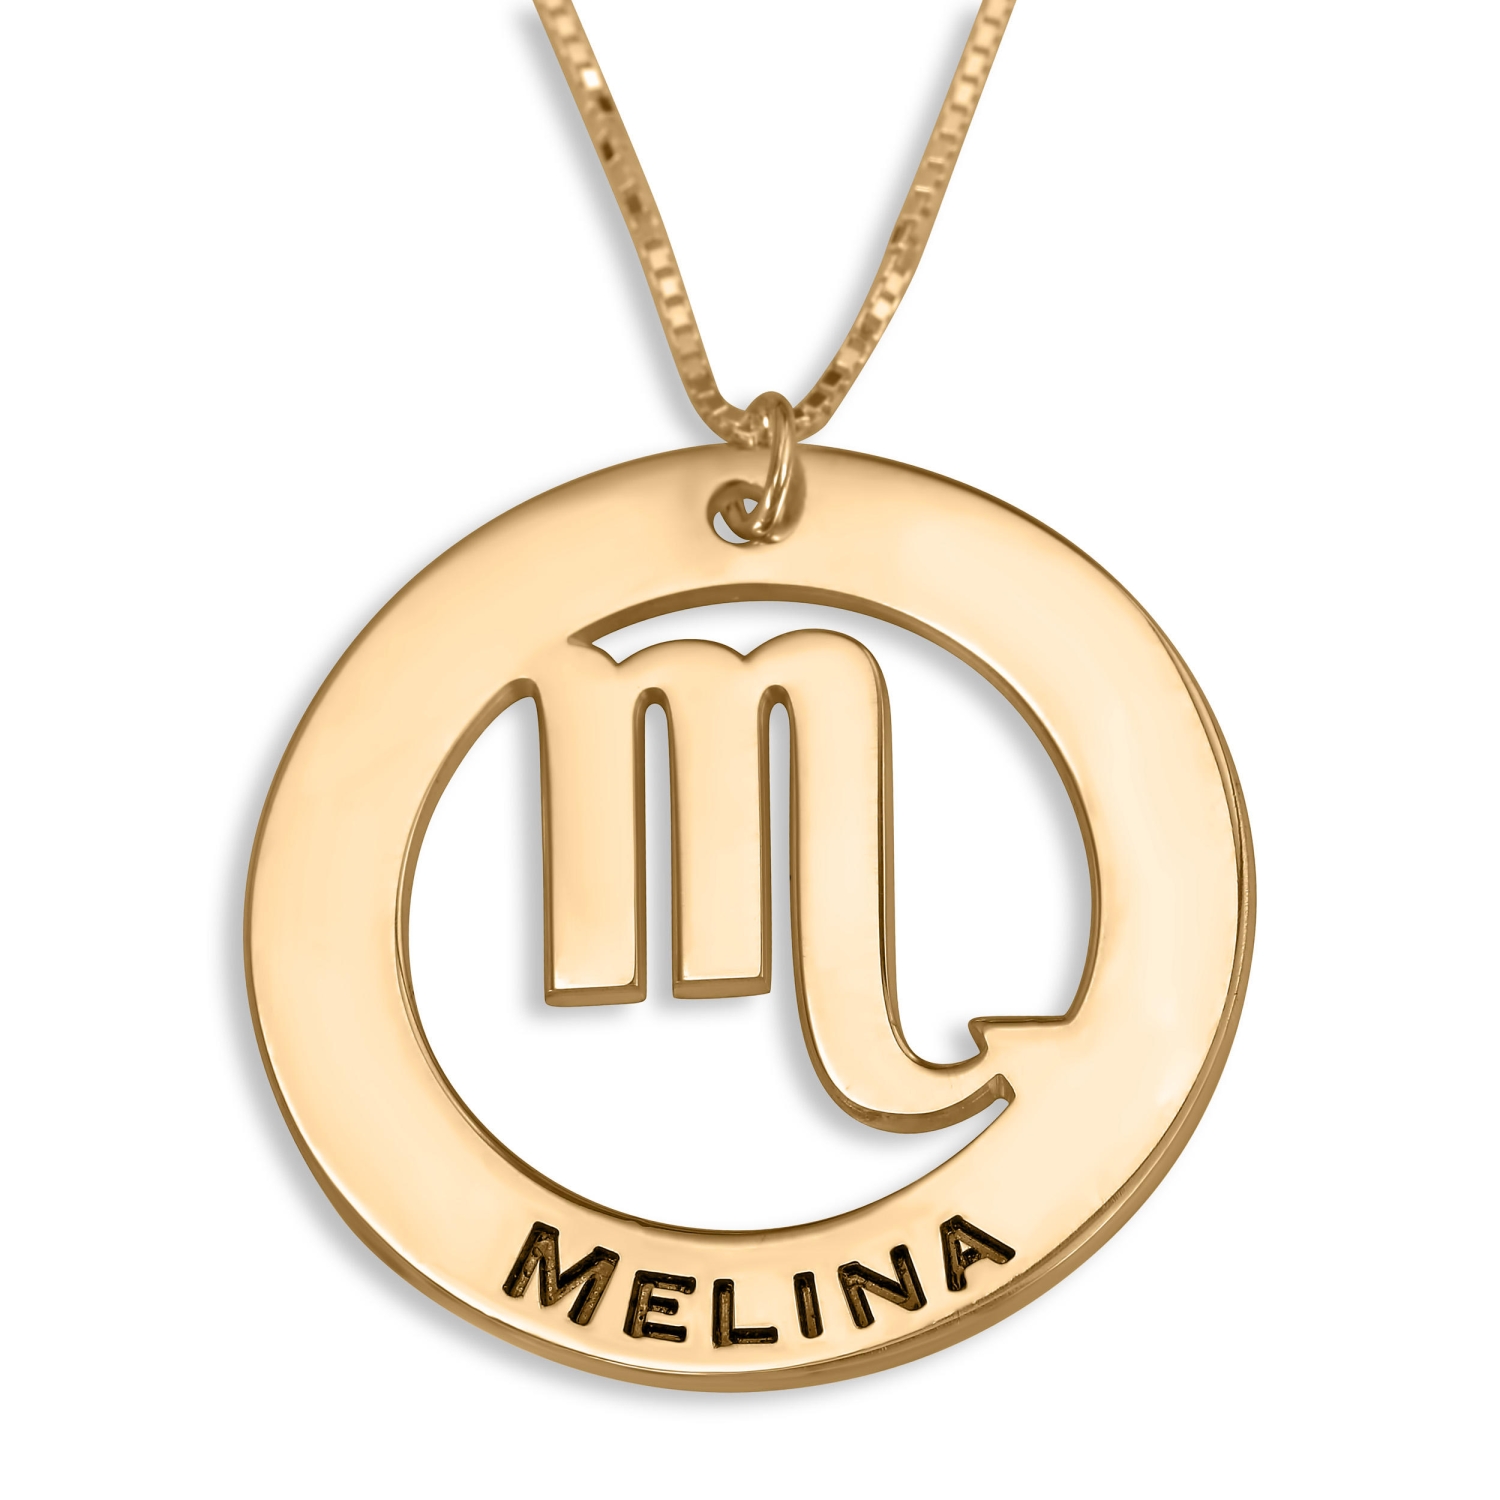 Scorpio Sign Name Necklace, 24K Gold Plated - 1